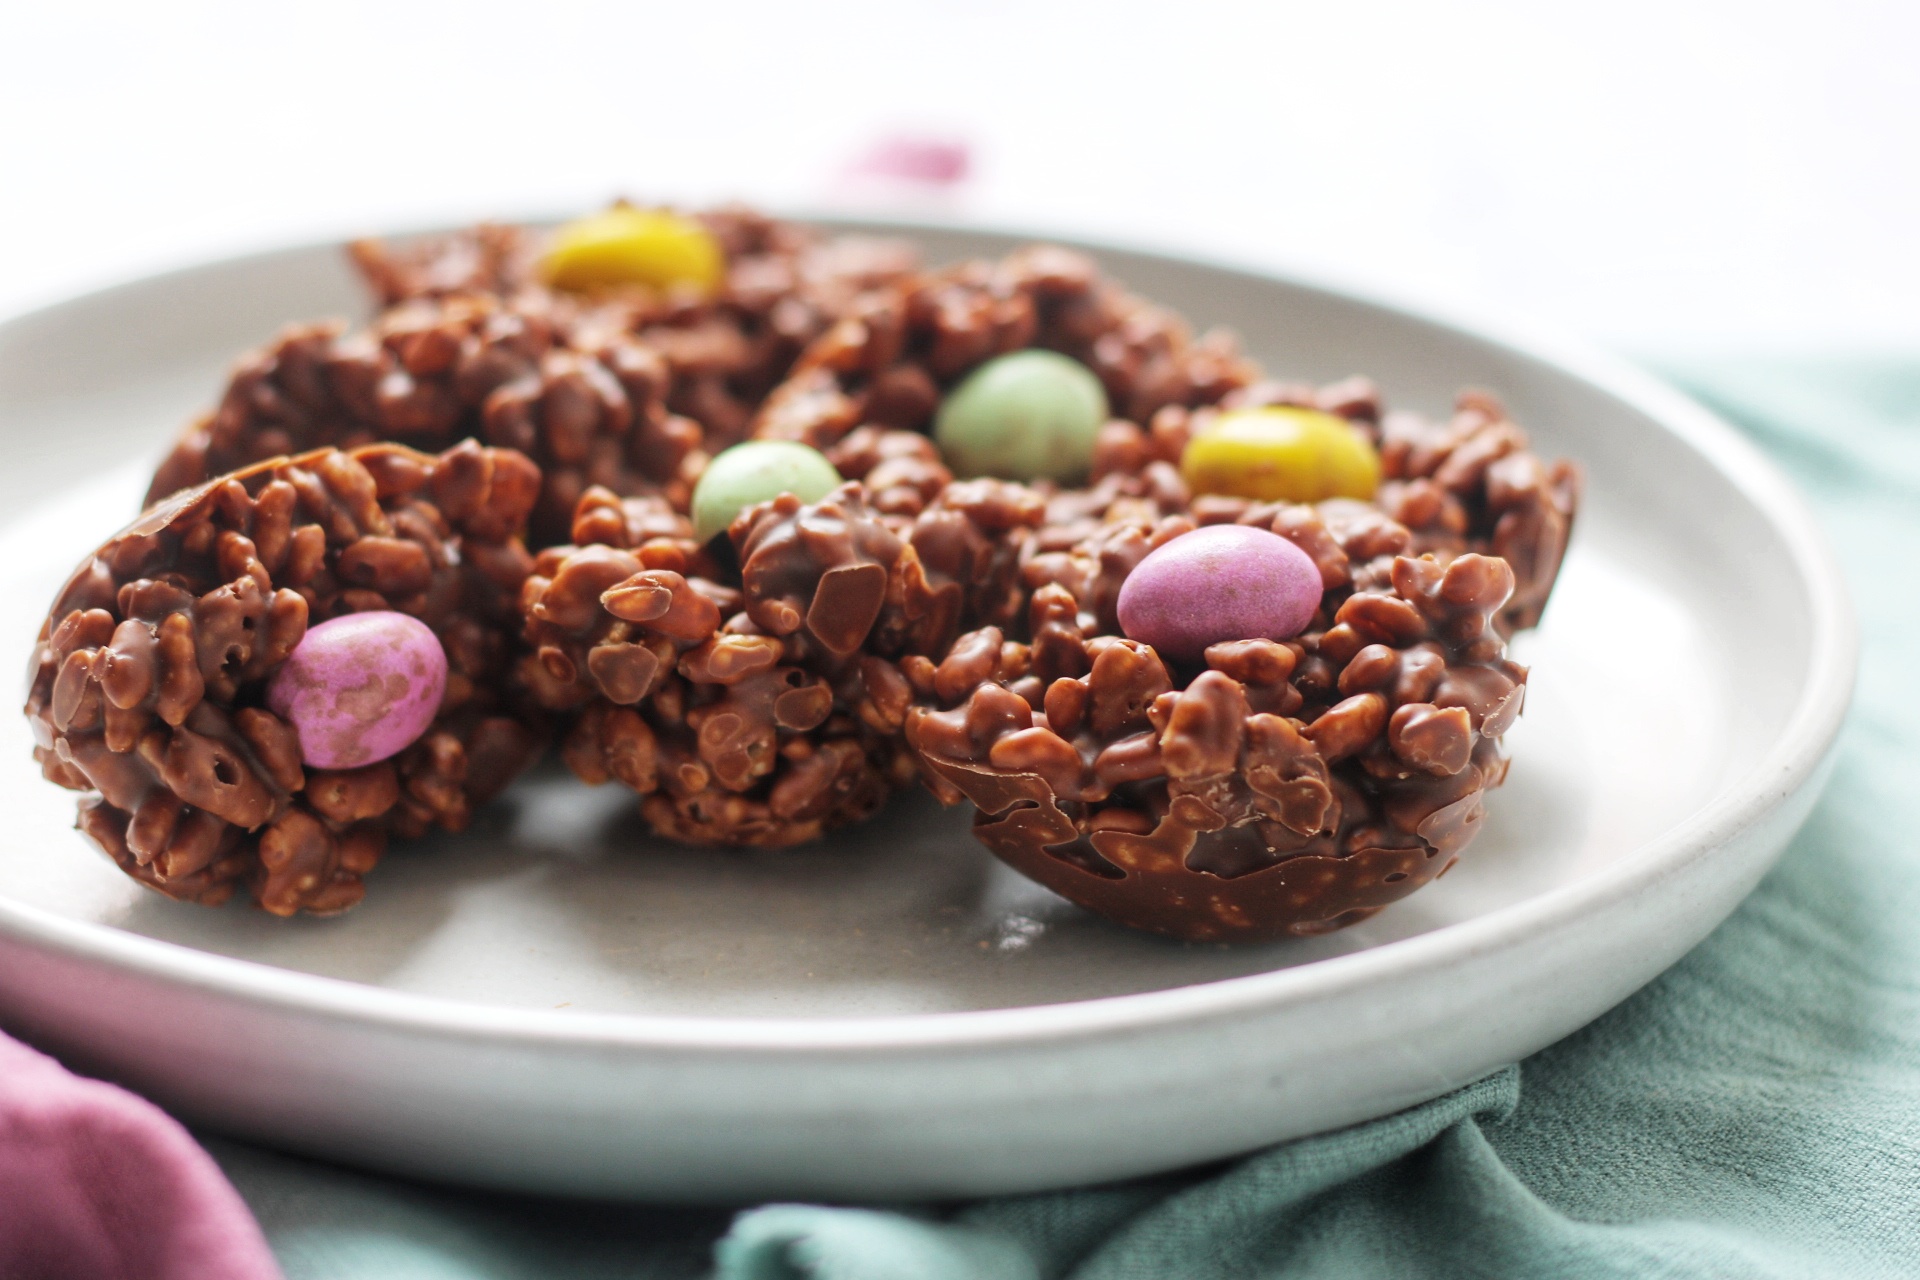 Chocolate Rice Krispie Nests (with variations)